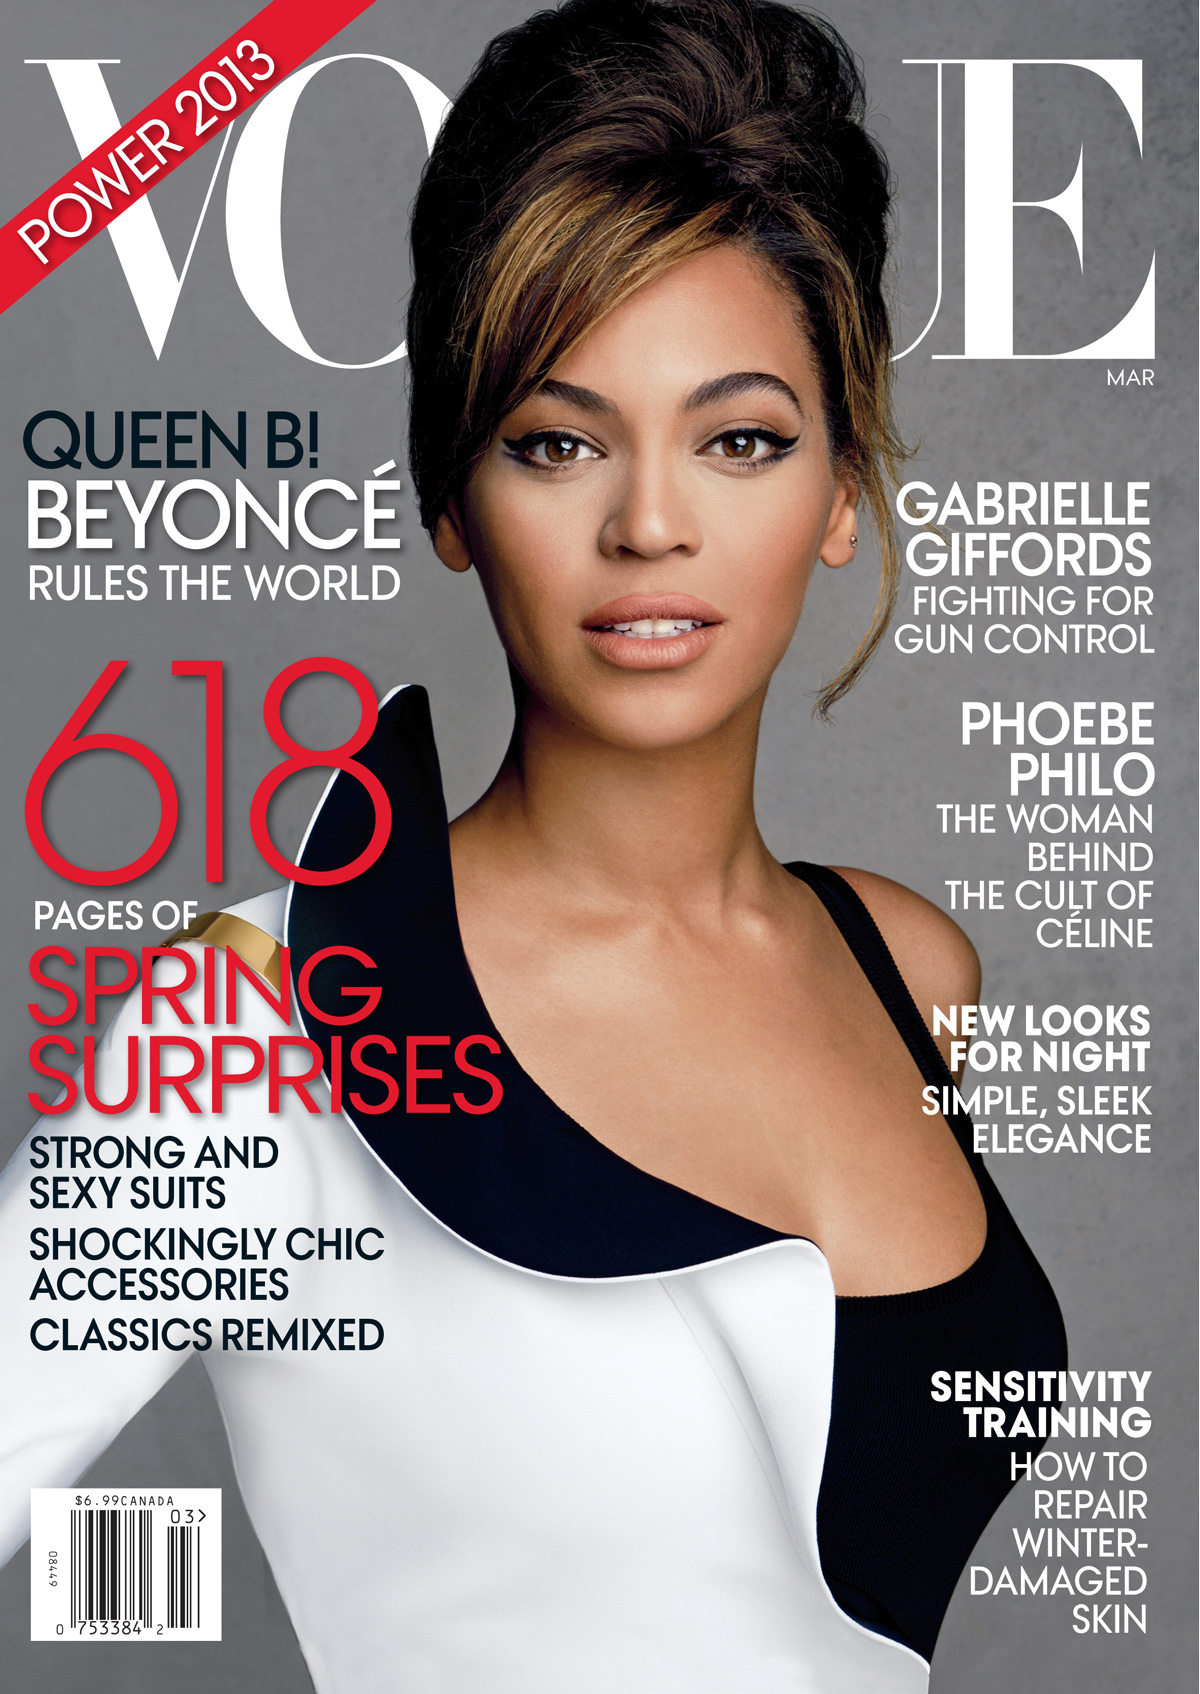 beyonce-vogue-cover-march-2013_144337662914.jpg